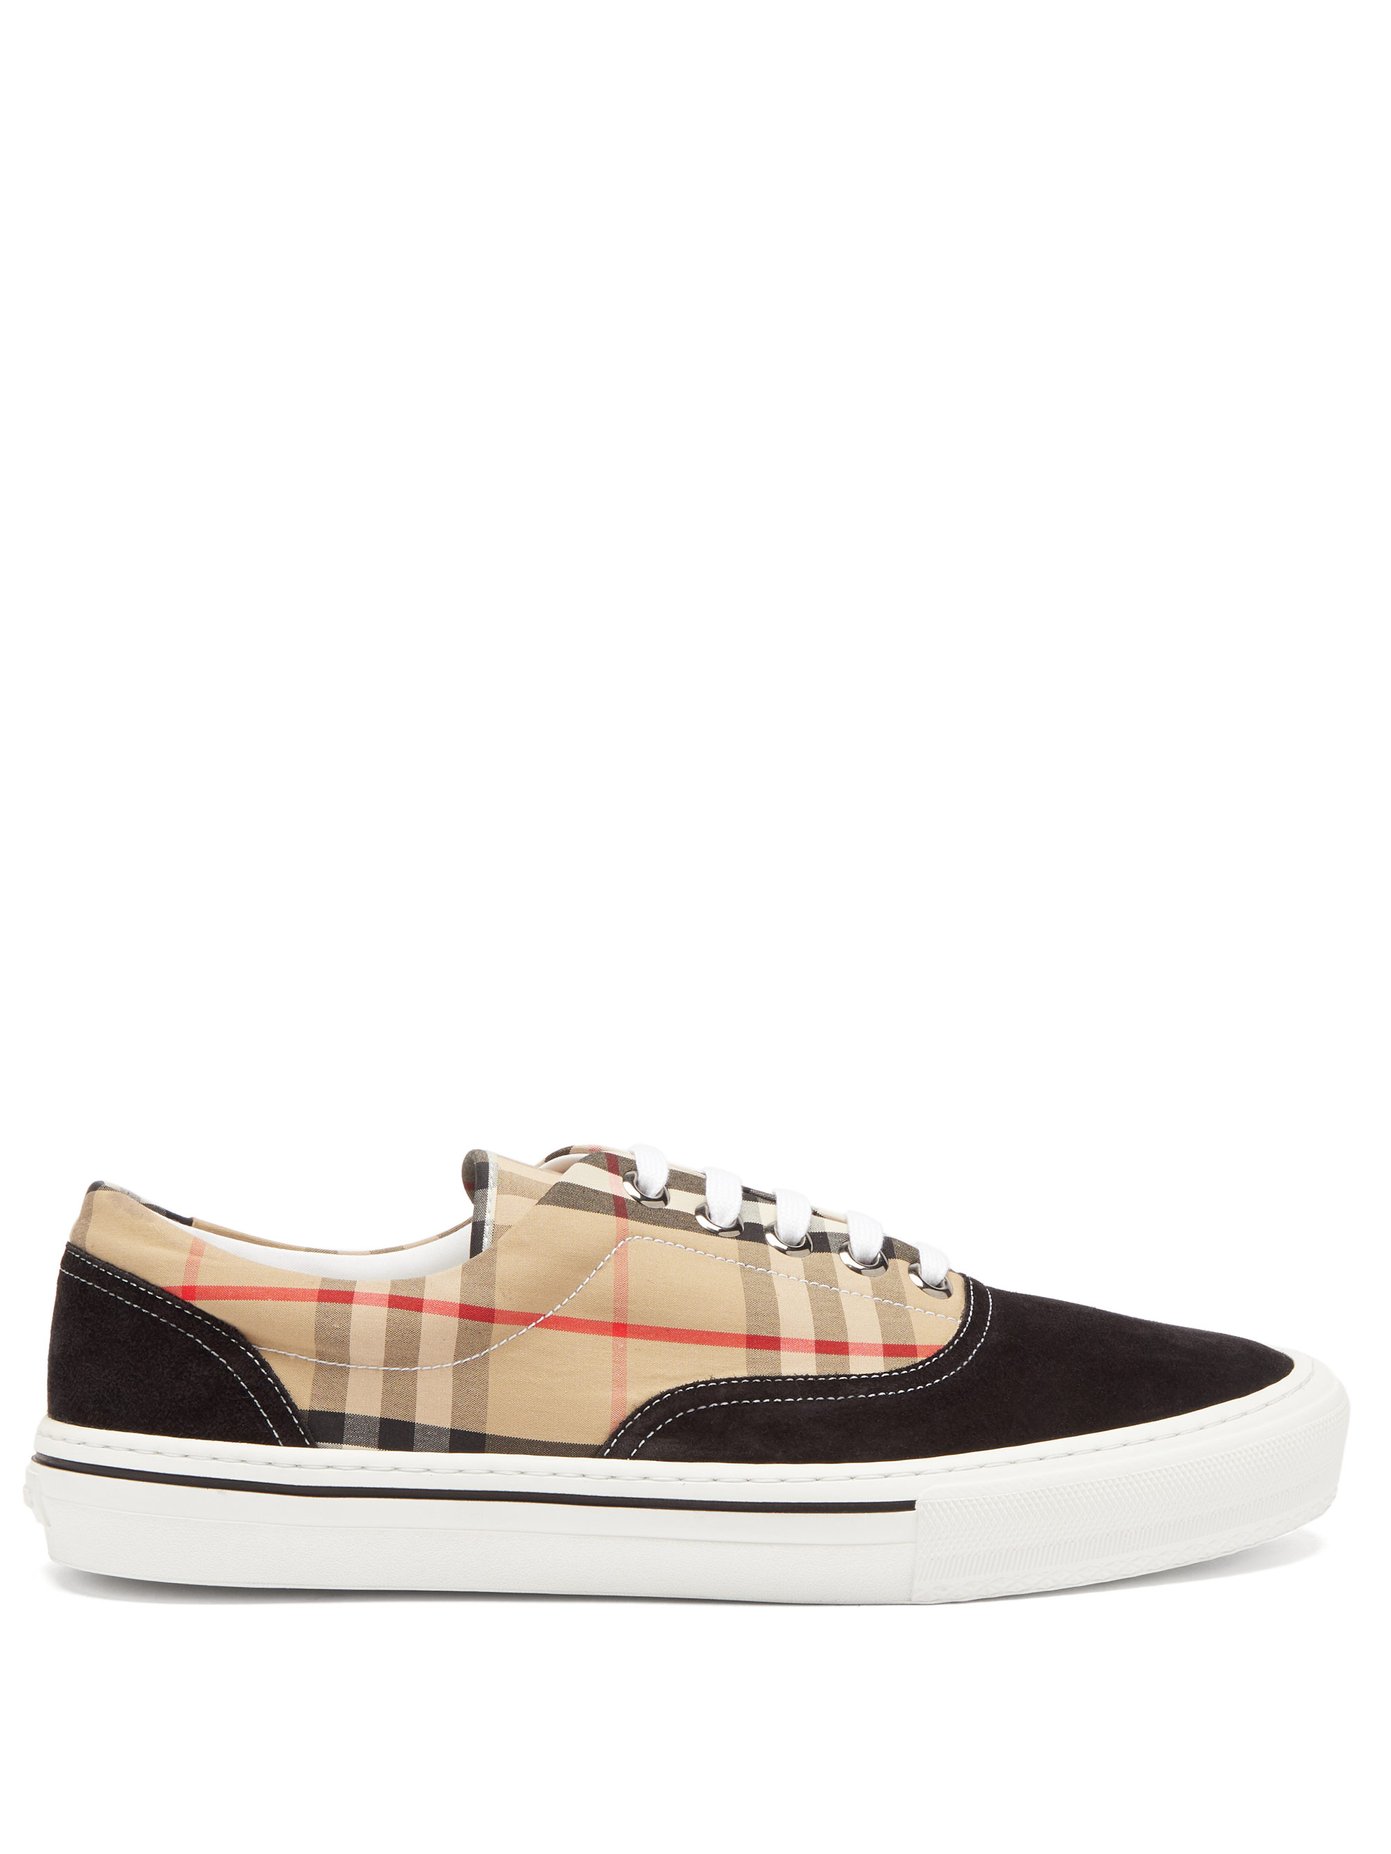 burberry trainers uk